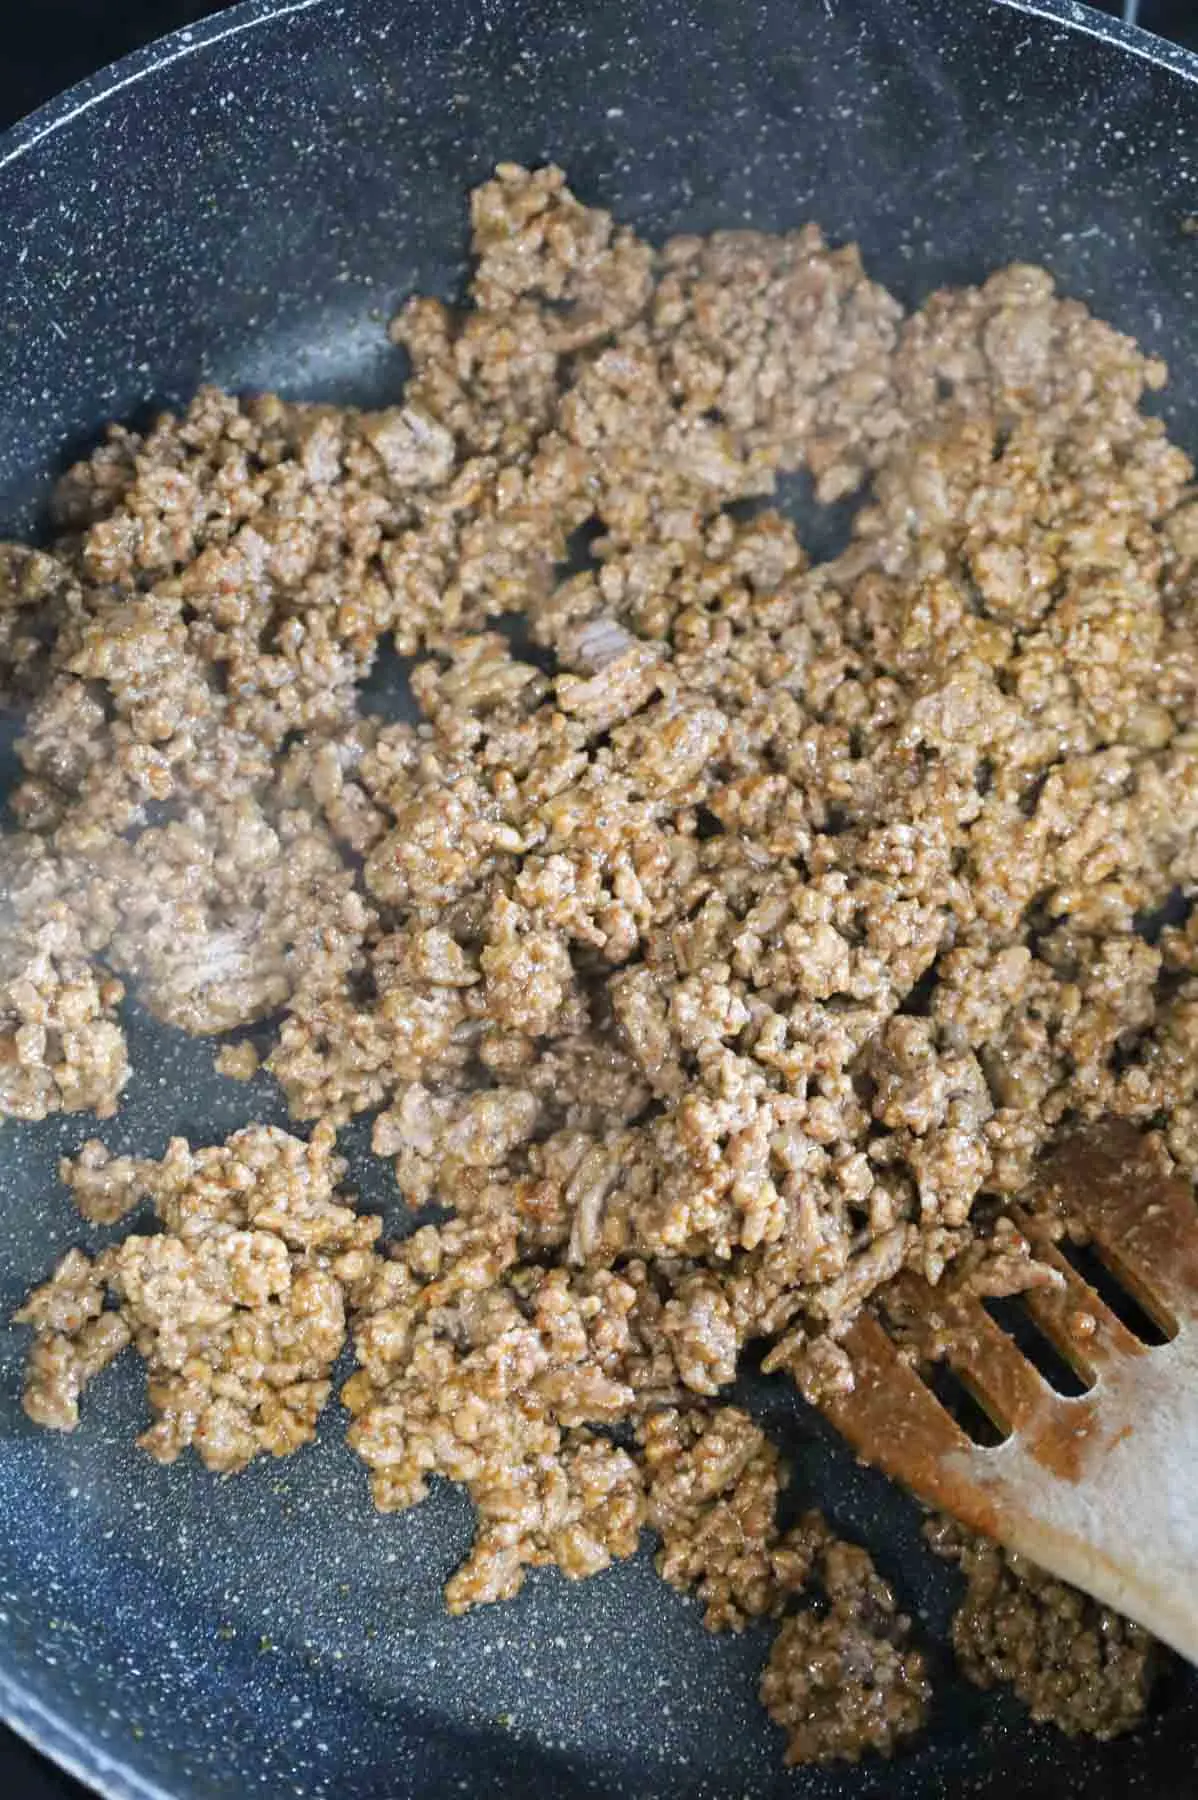 ground beef coated in taco seasoning in a skillet